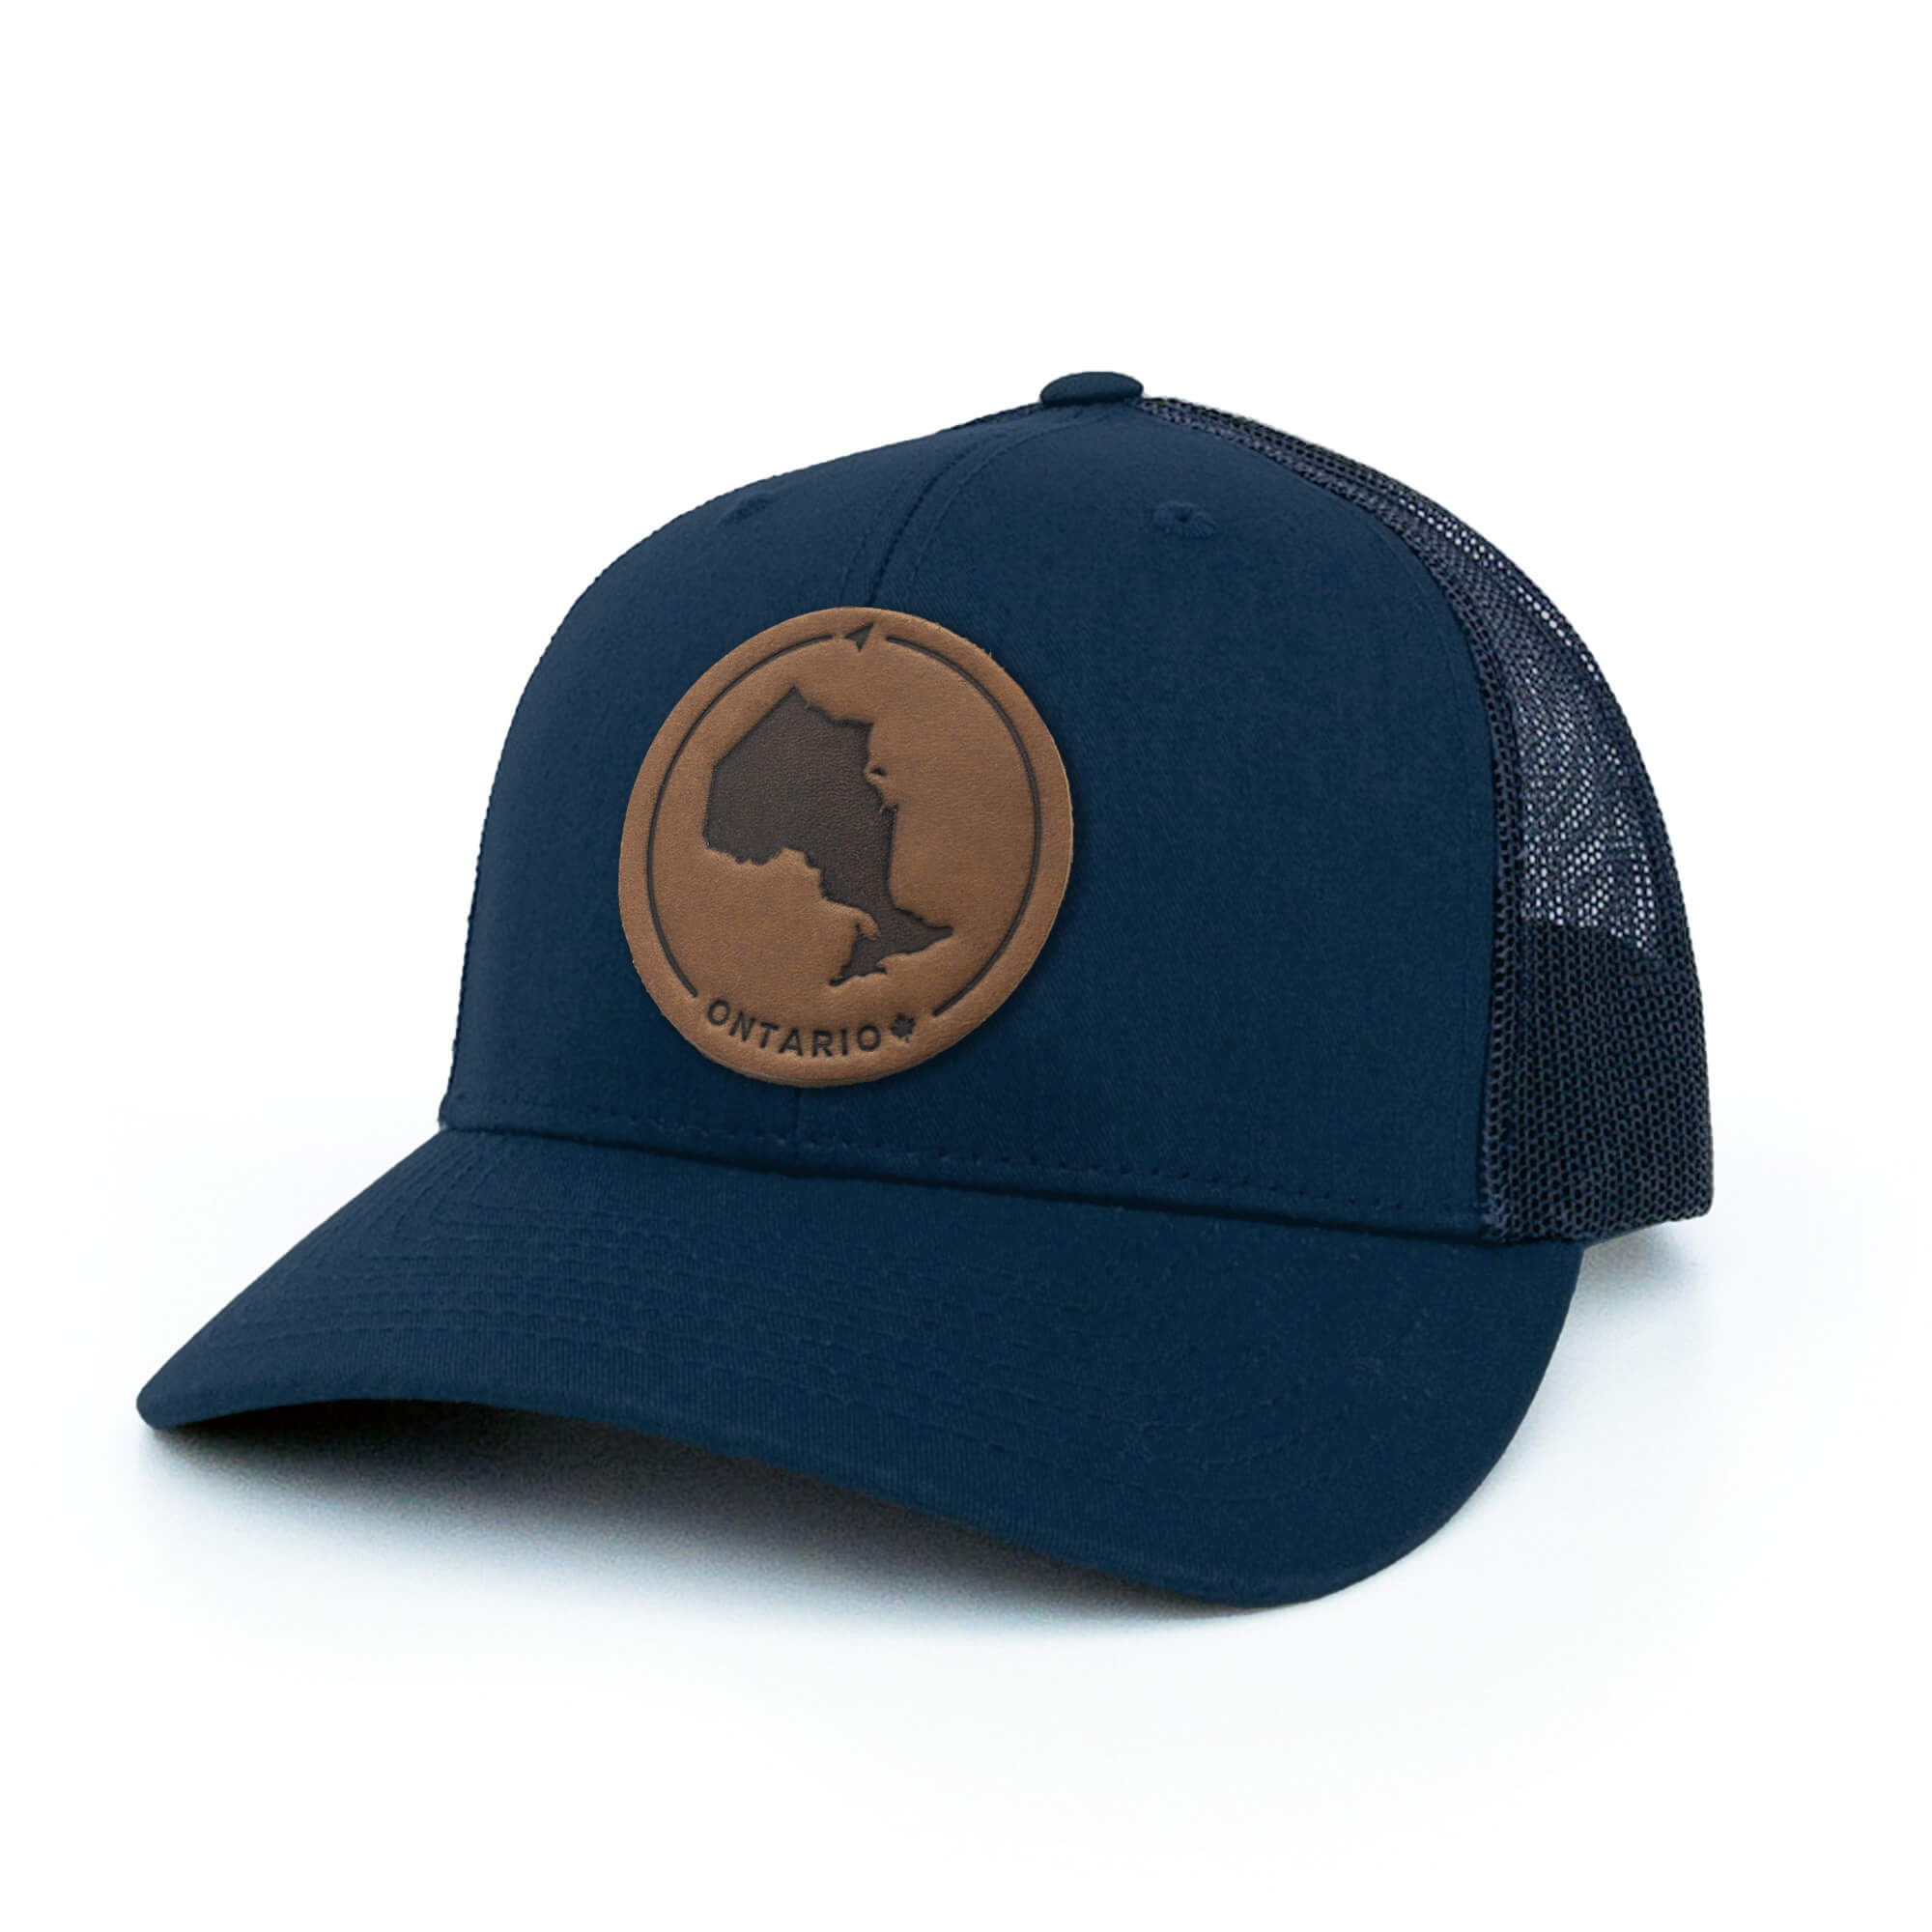 Navy trucker hat with full-grain leather patch of Ontario | BLACK-002-003, CHARC-002-003, NAVY-002-003, HGREY-002-003, MOSS-002-003, BROWN-002-003